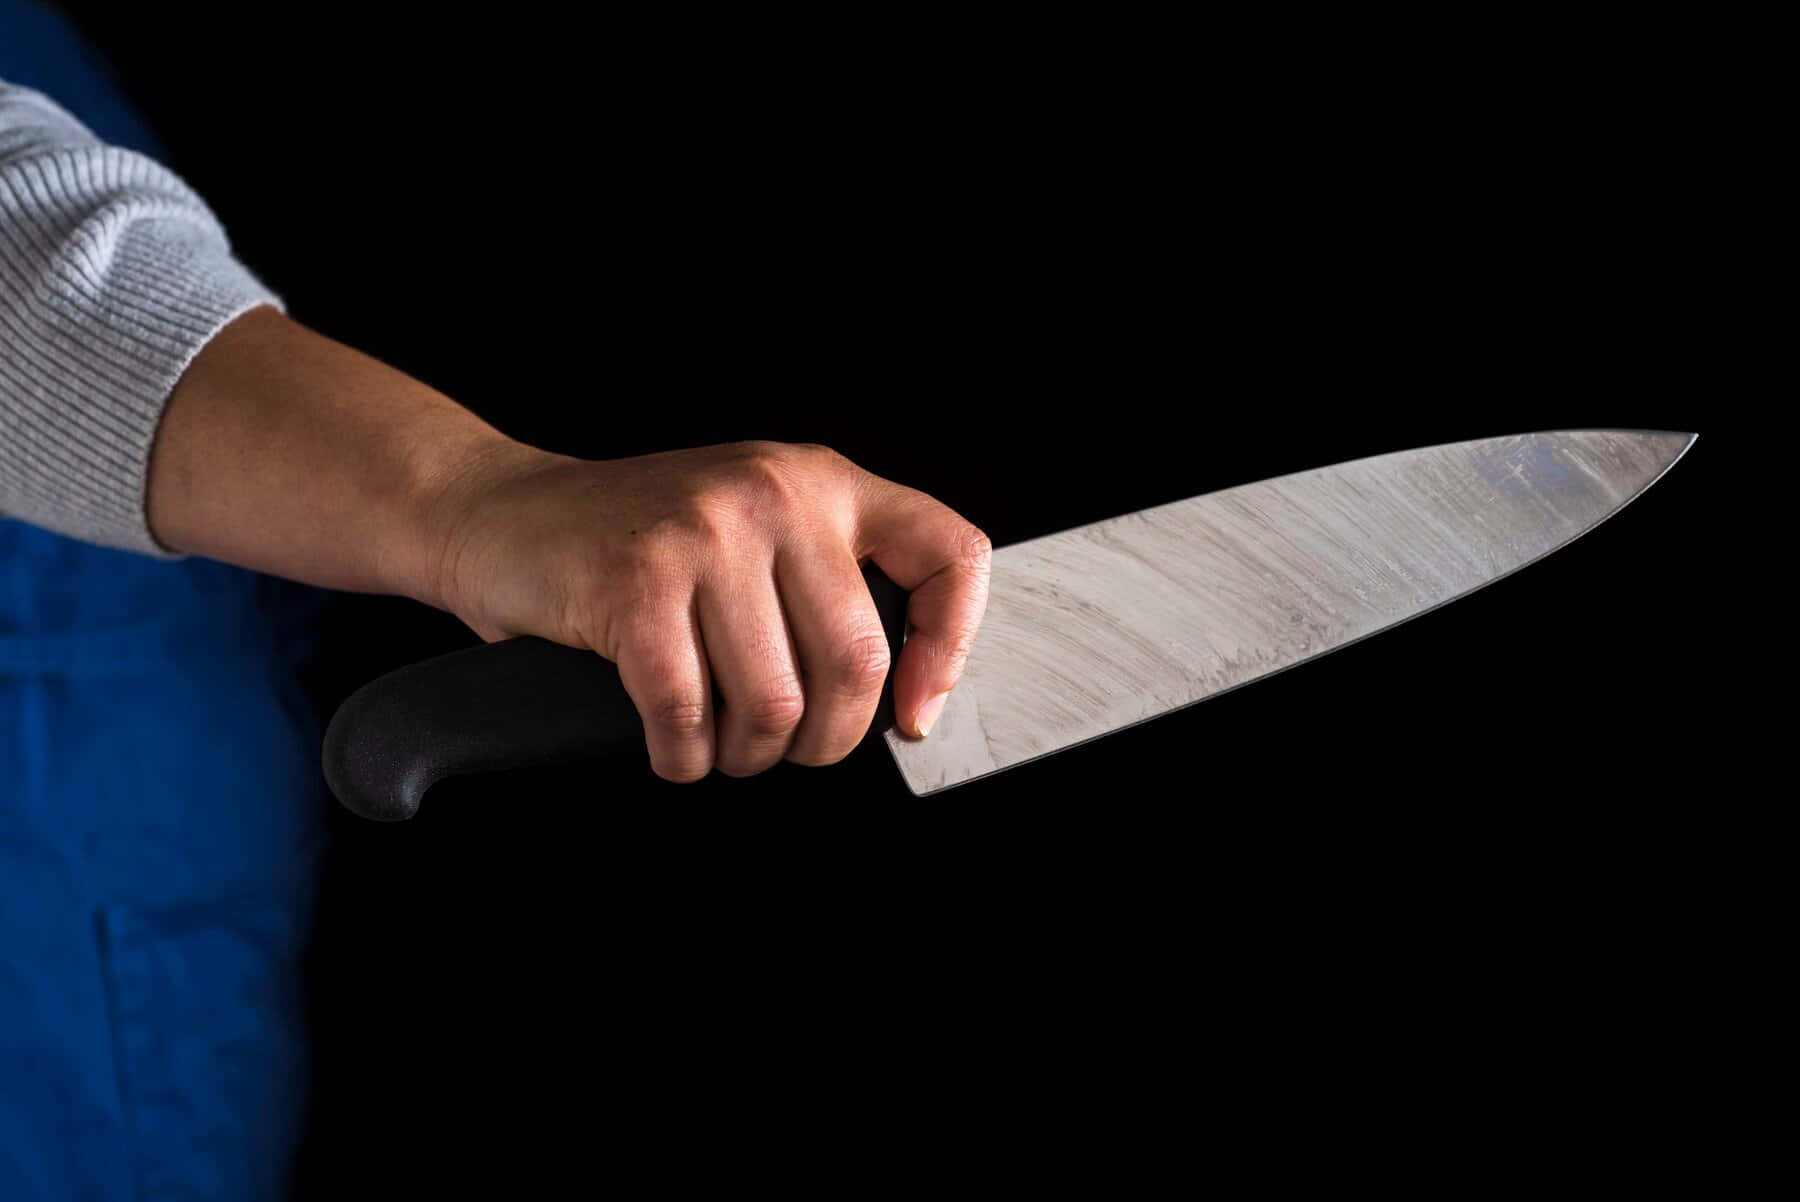 A Person Holding A Knife On A Black Background